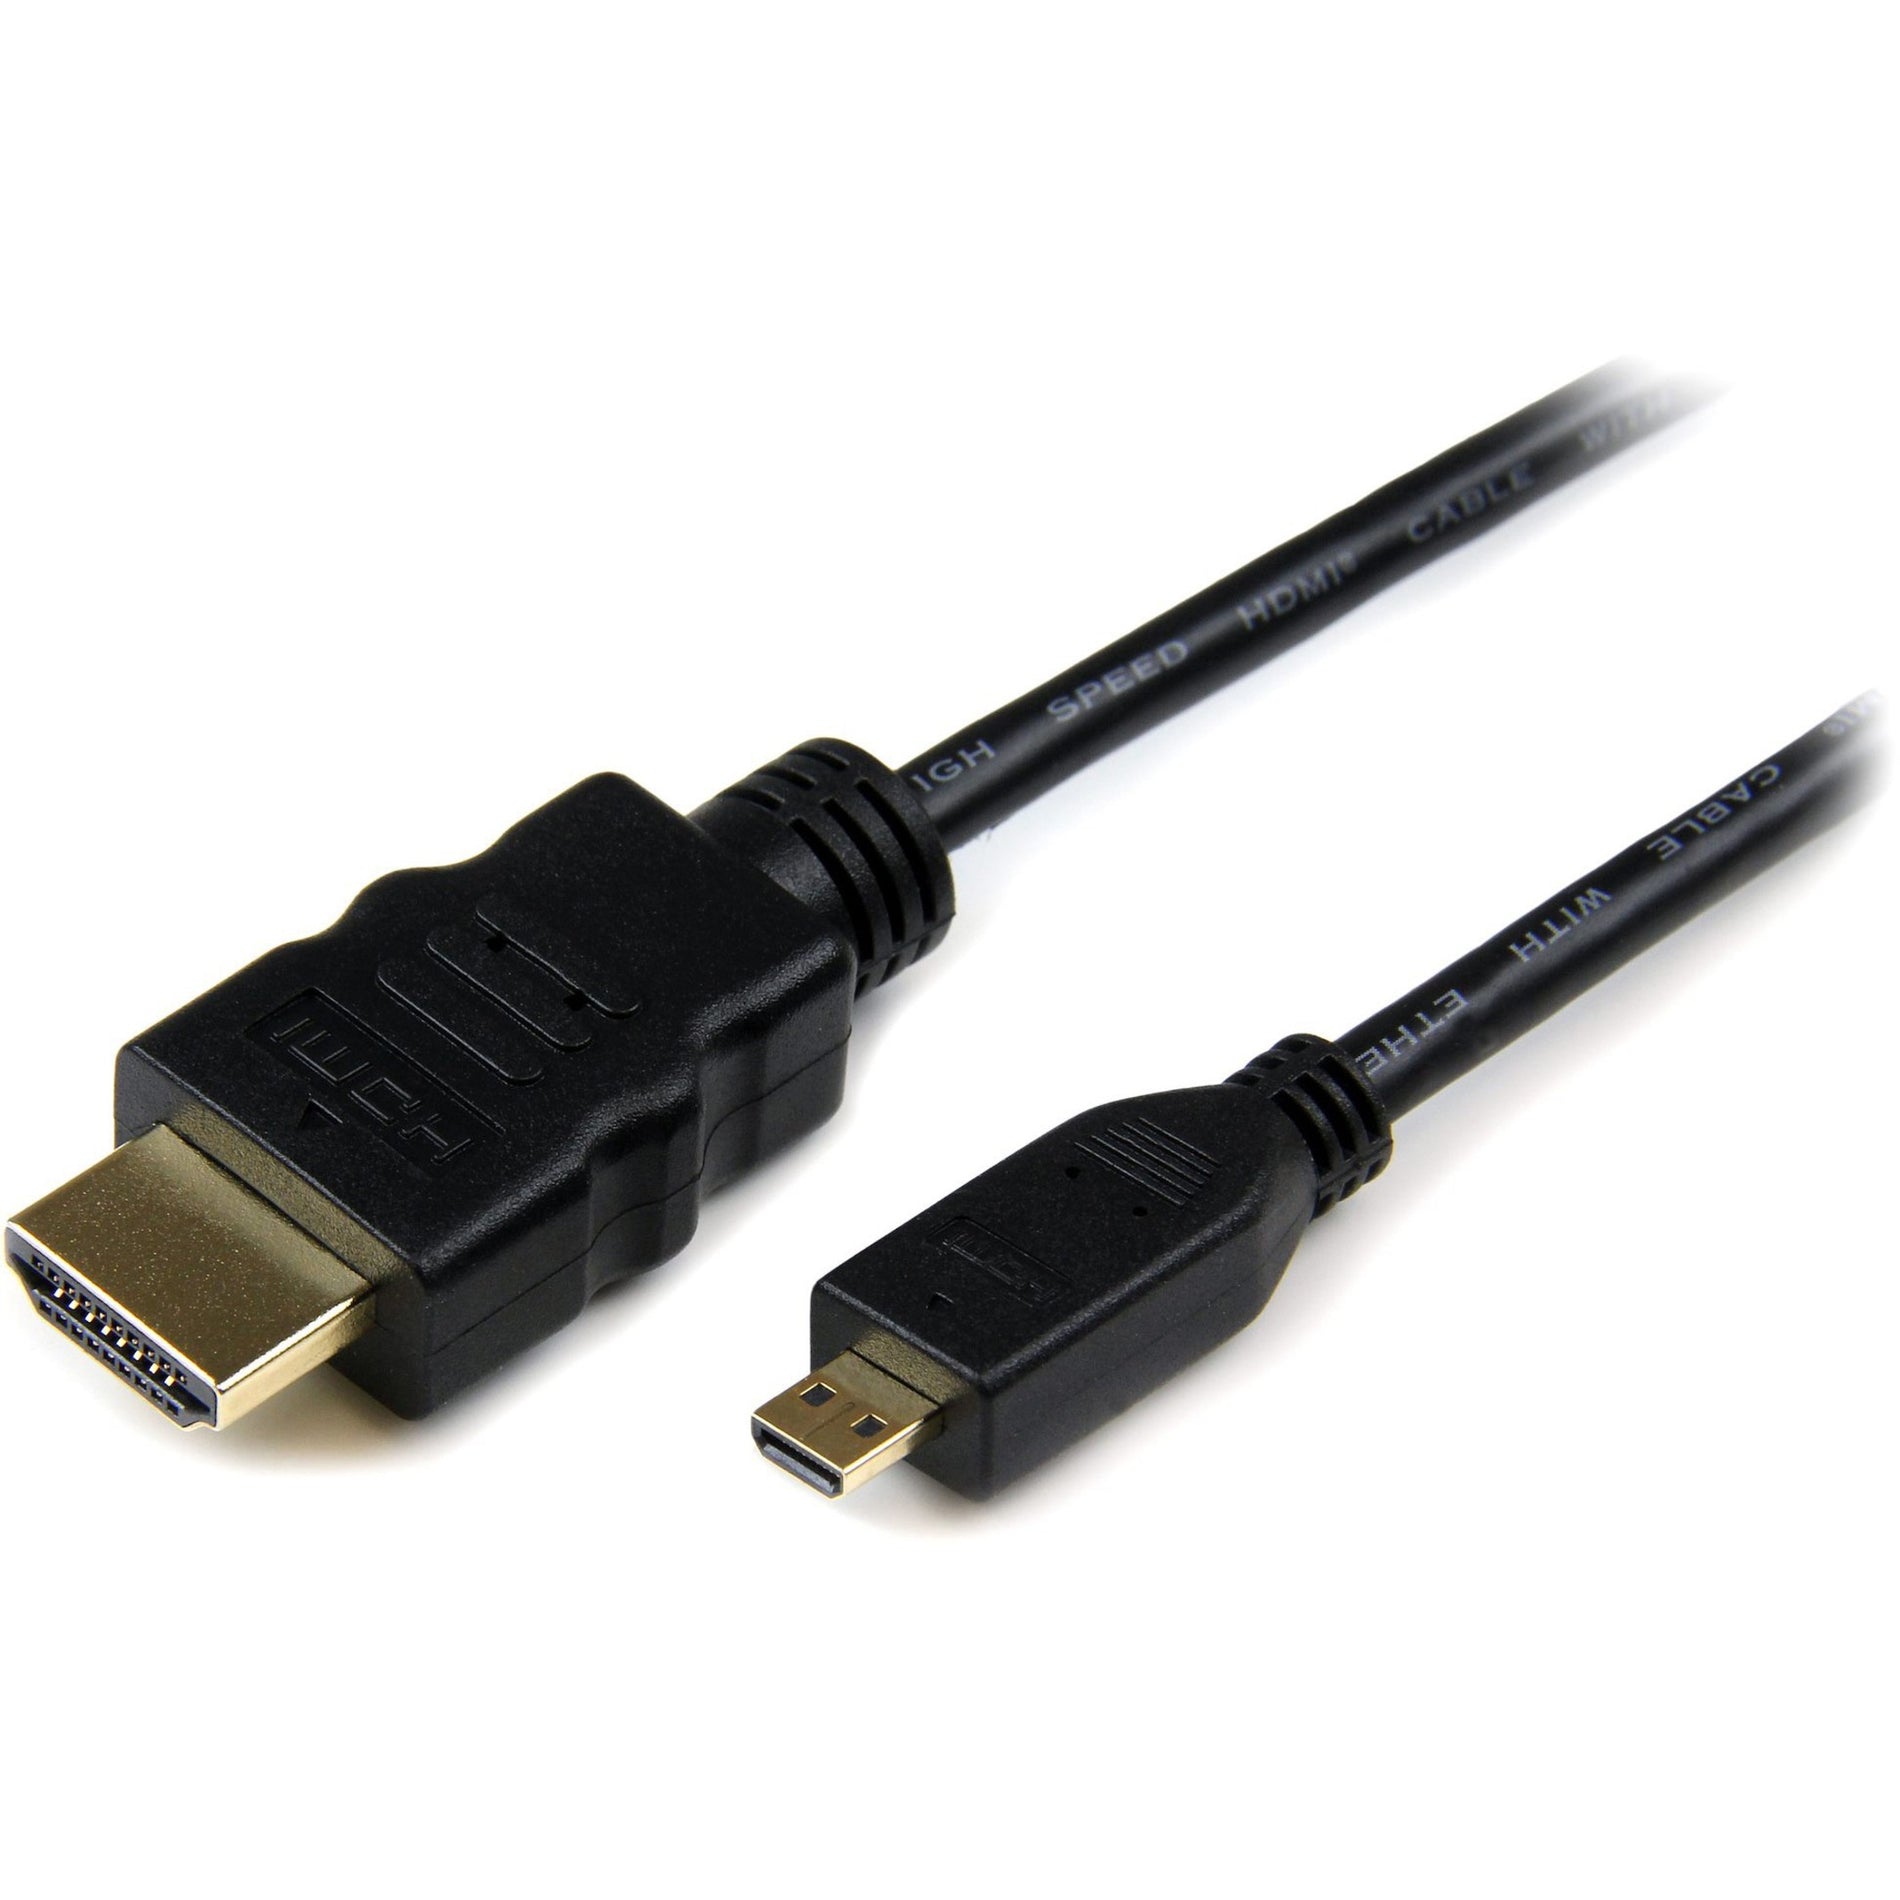 High Speed HDMI Cable with Ethernet - HDMI to HDMI Micro - 9.84 ft (HDADMM3M)